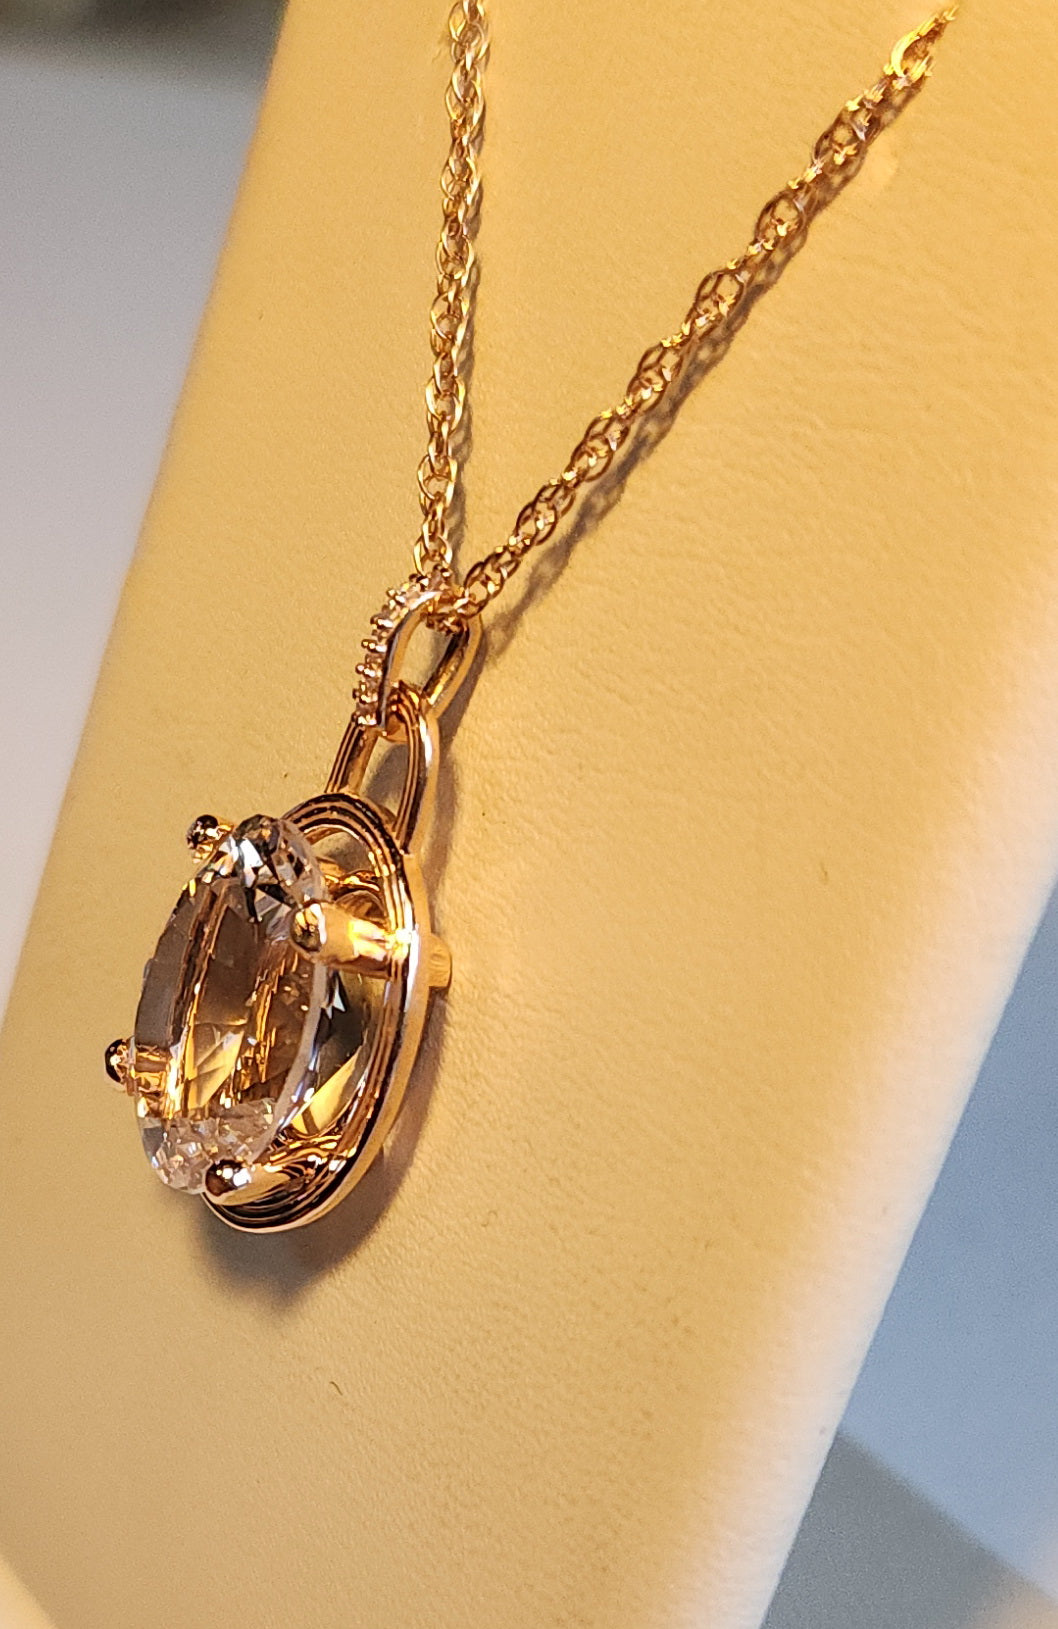 6.89ct Pink Texas topaz set in a 14kt pink gold setting with diamond accents on an available  18" -  14kt chain.